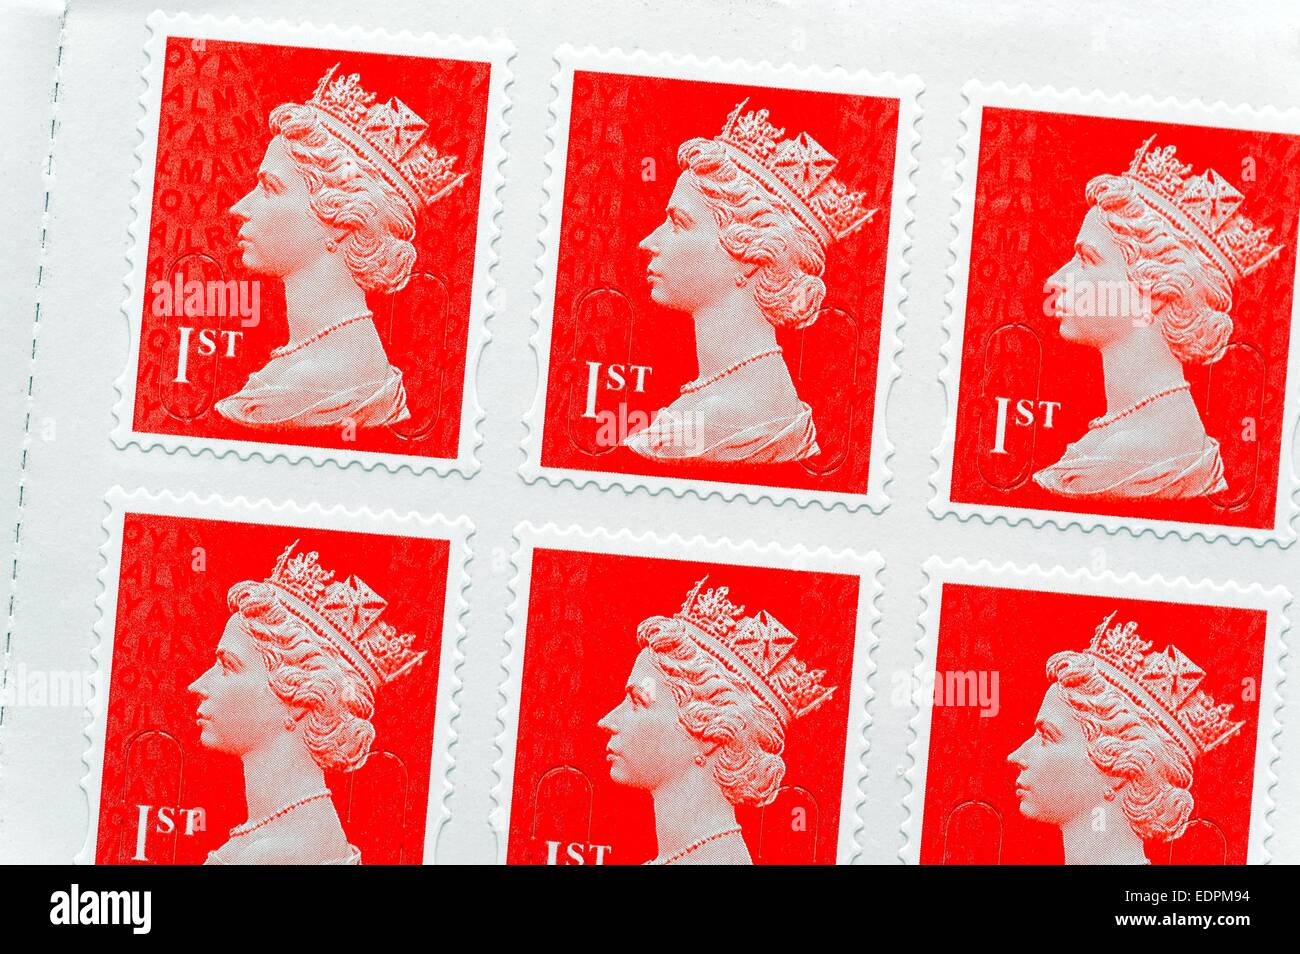 What is unique about British postage stamps?